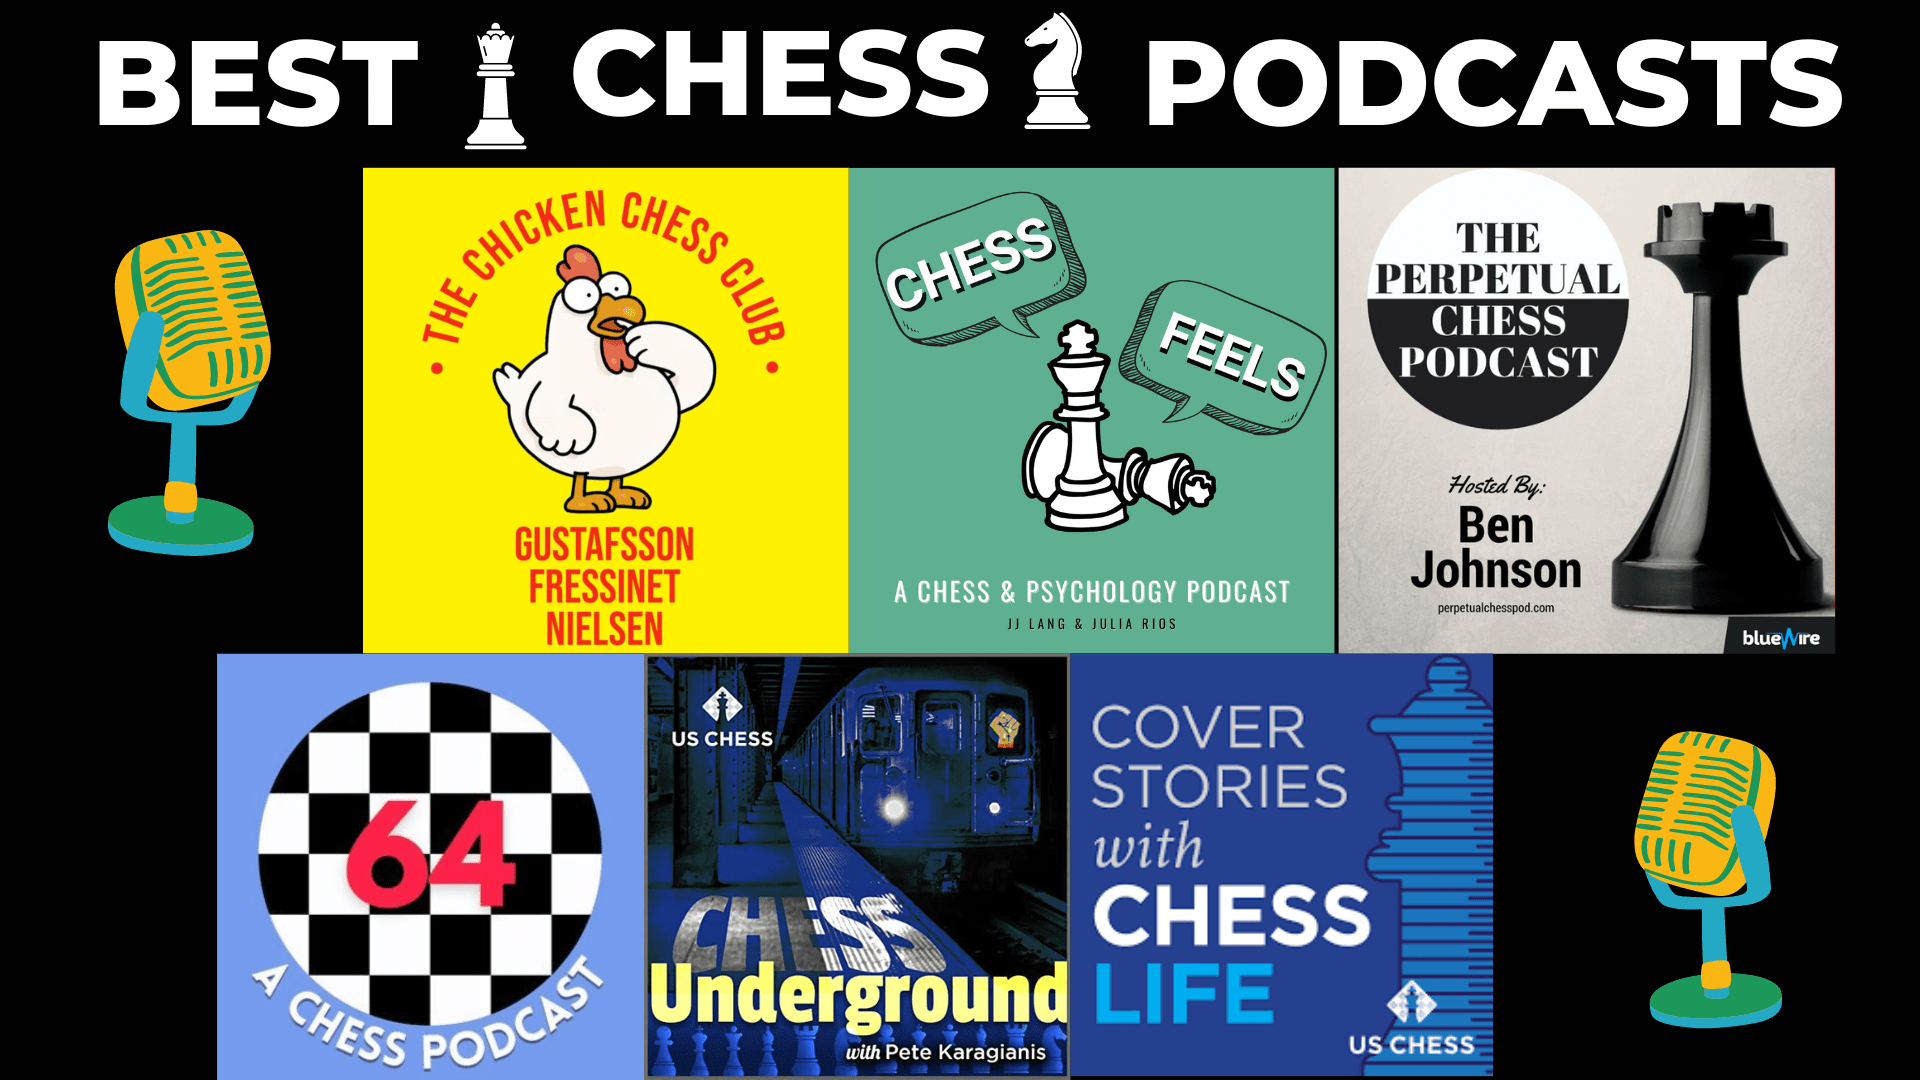 Best Chess Podcasts The Ultimate Guide To Chess Podcasts in 2022